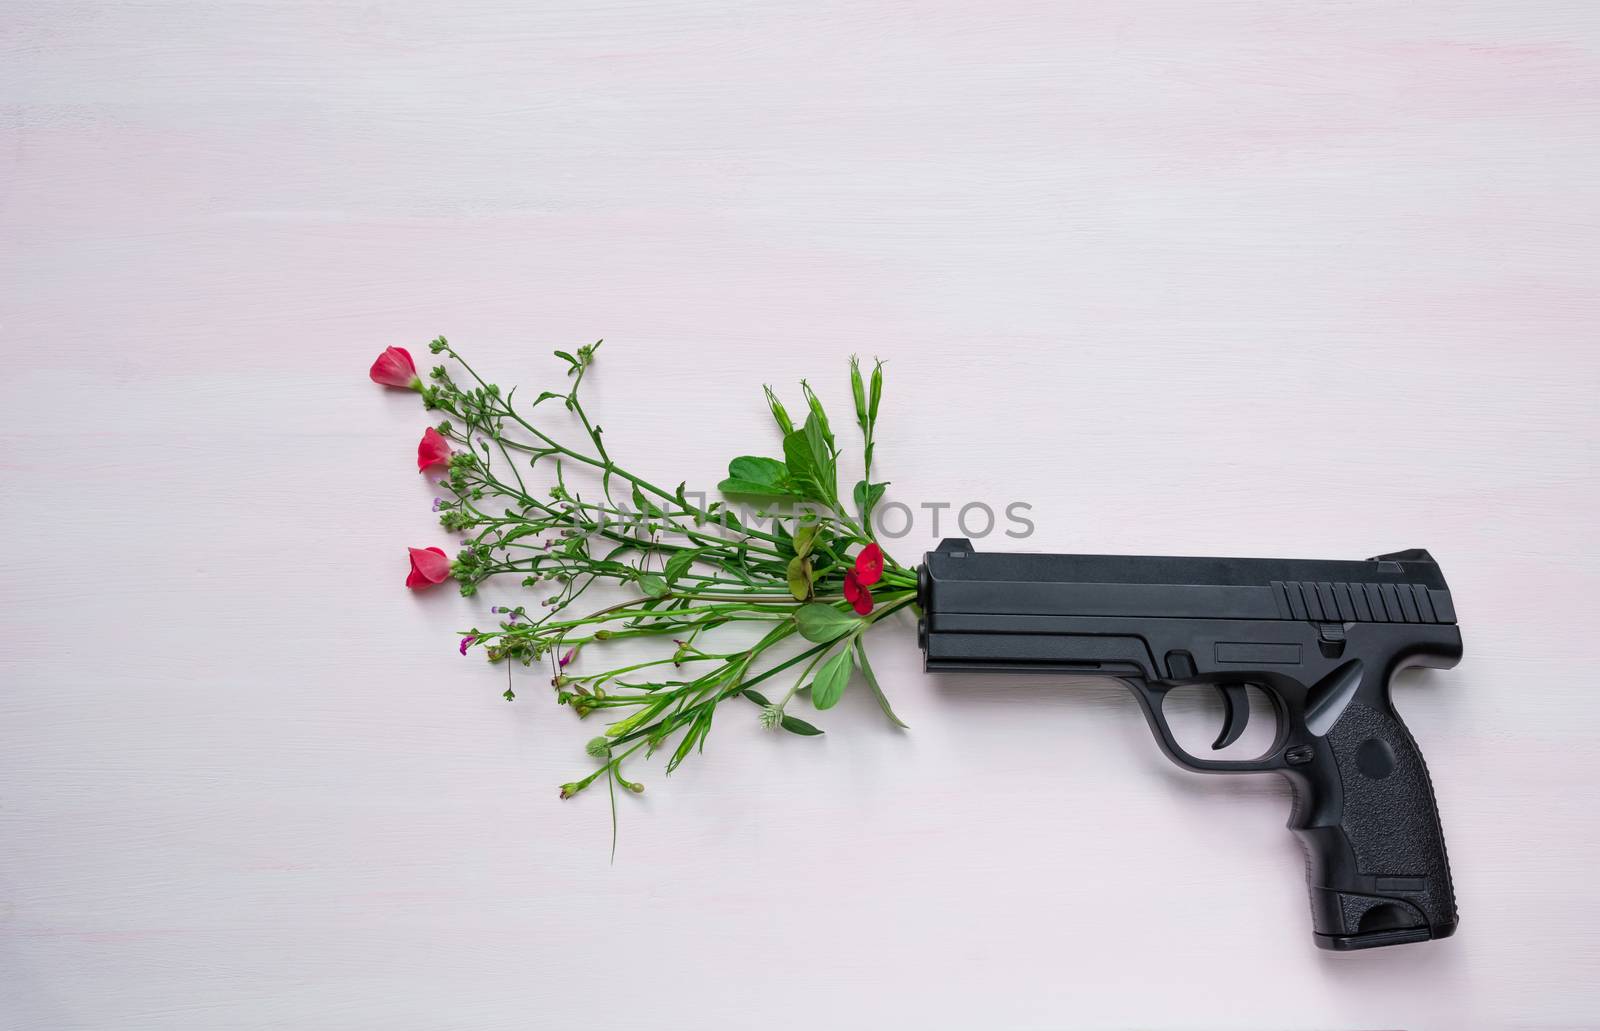 Handgun on wooden background with flowers.War and peace full wit by kirisa99